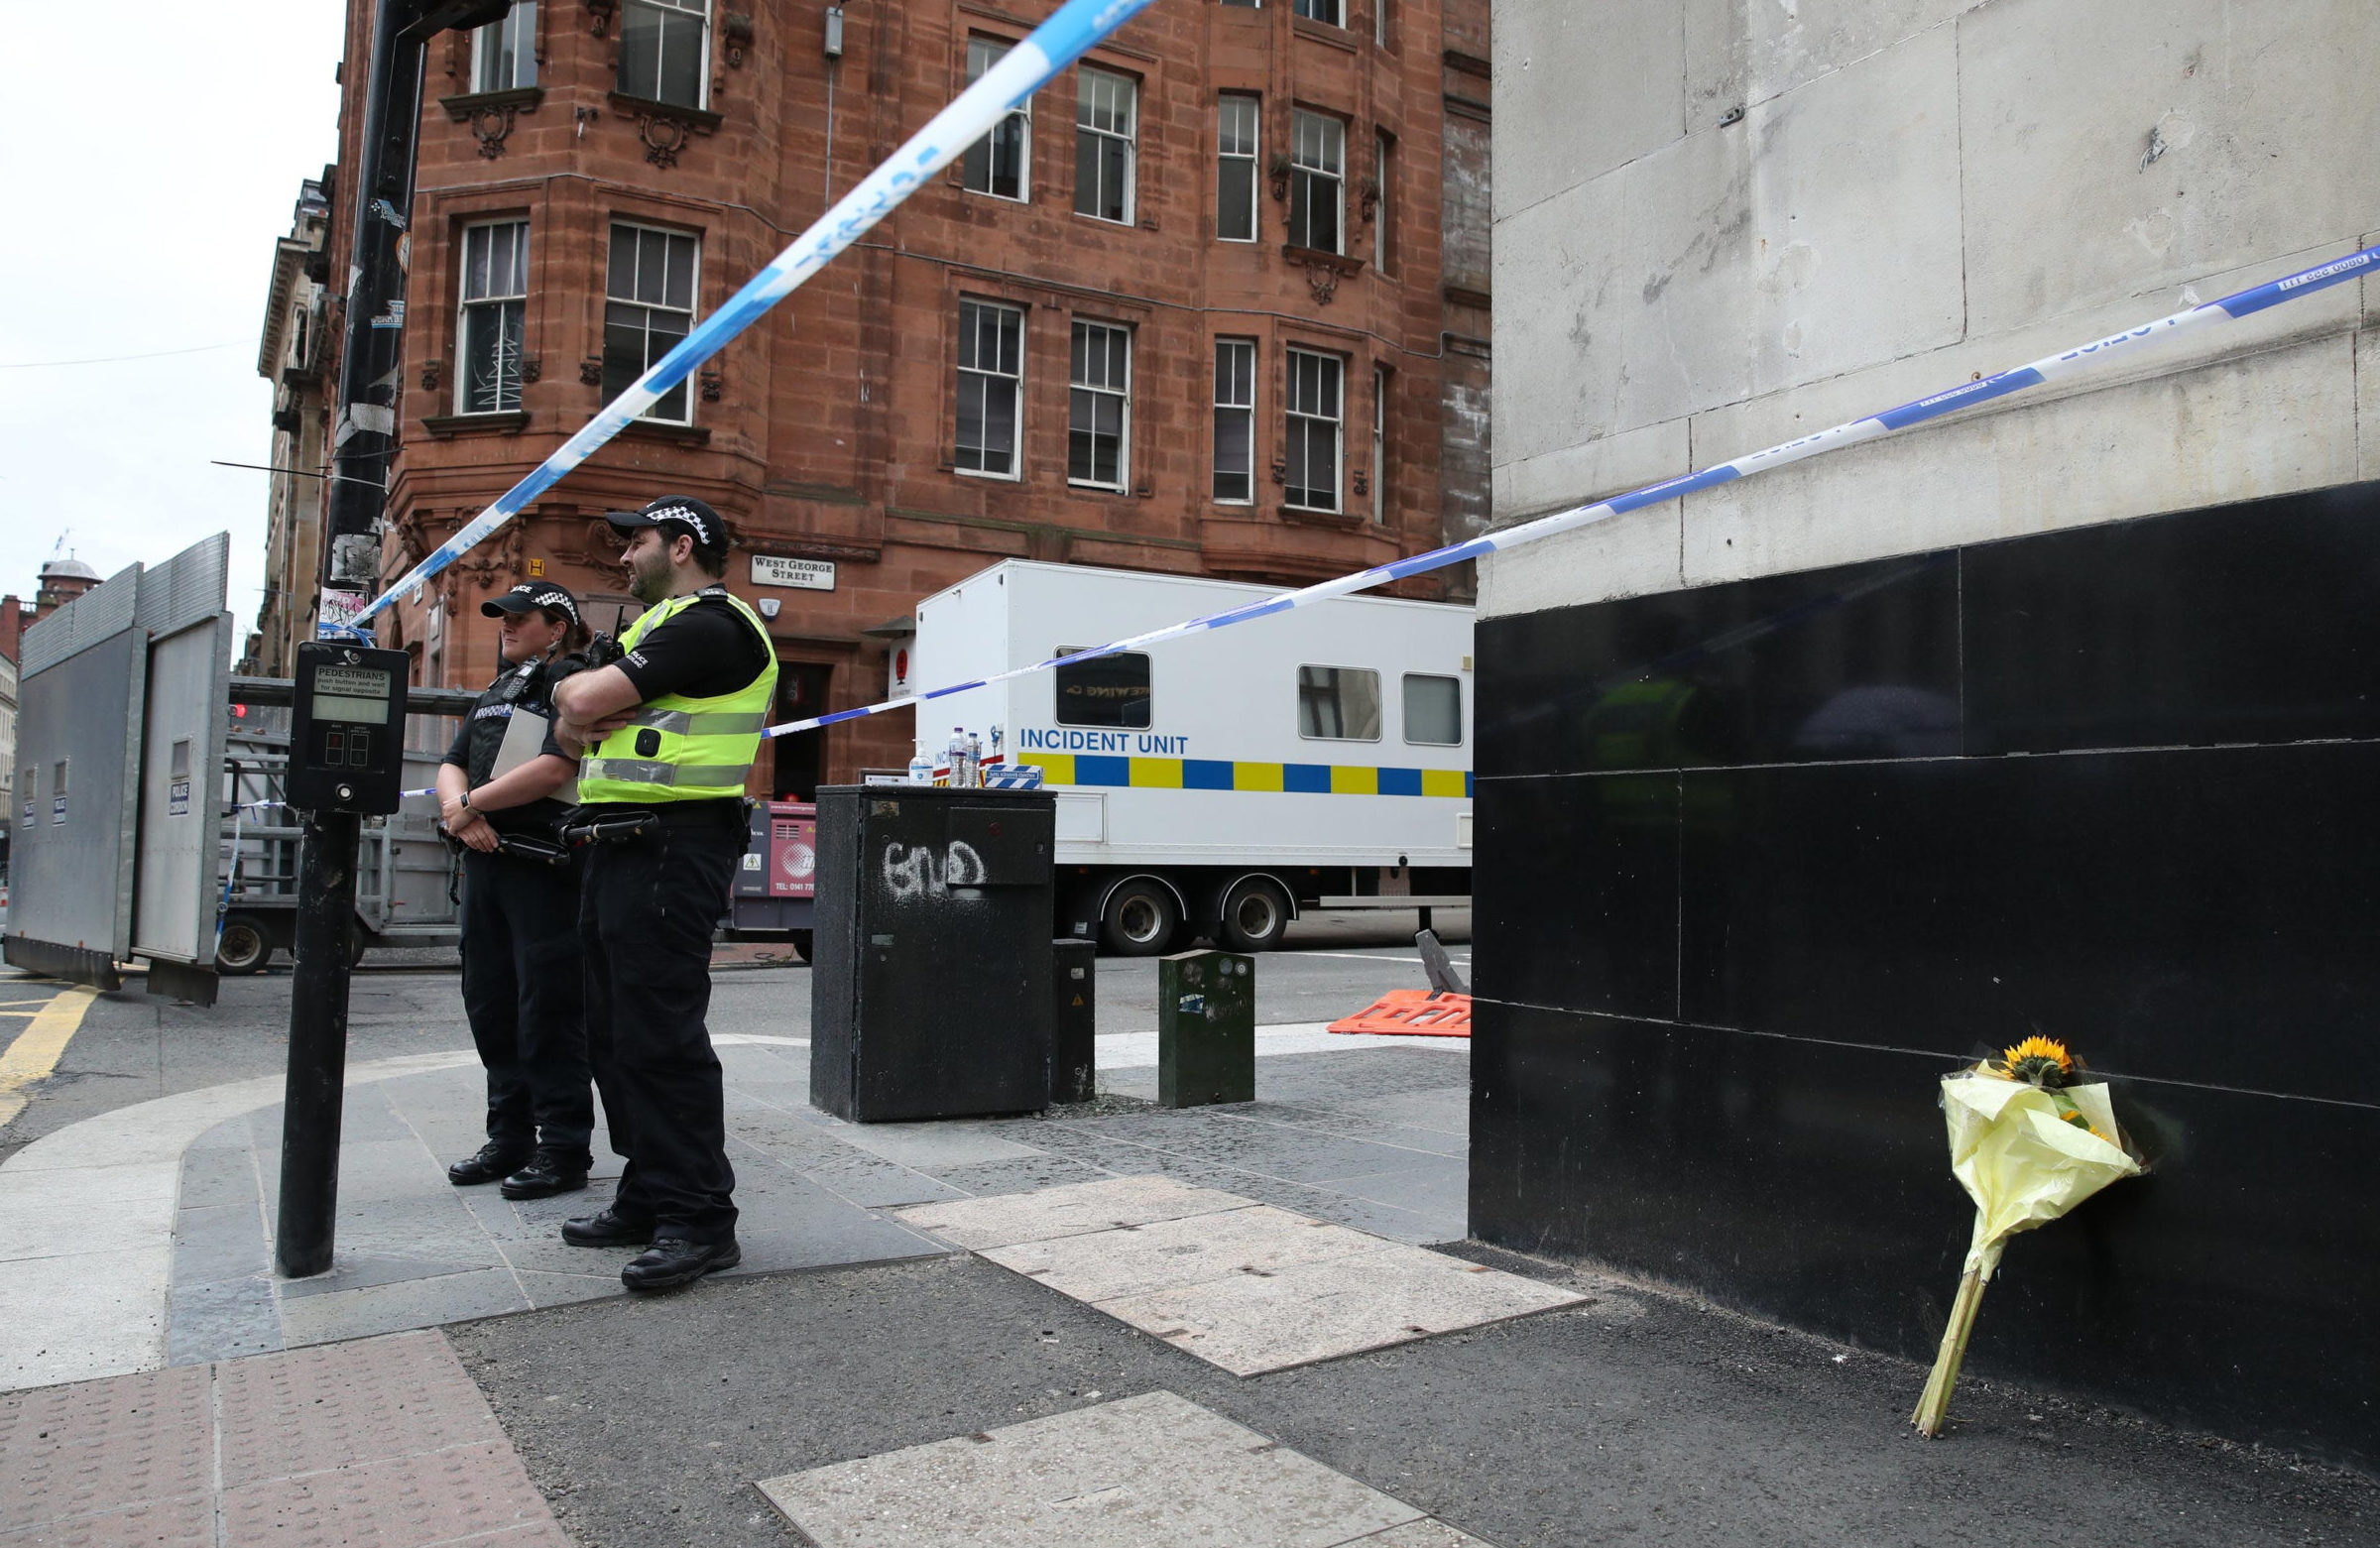 The scene of the knife attack in Glasgow on Friday